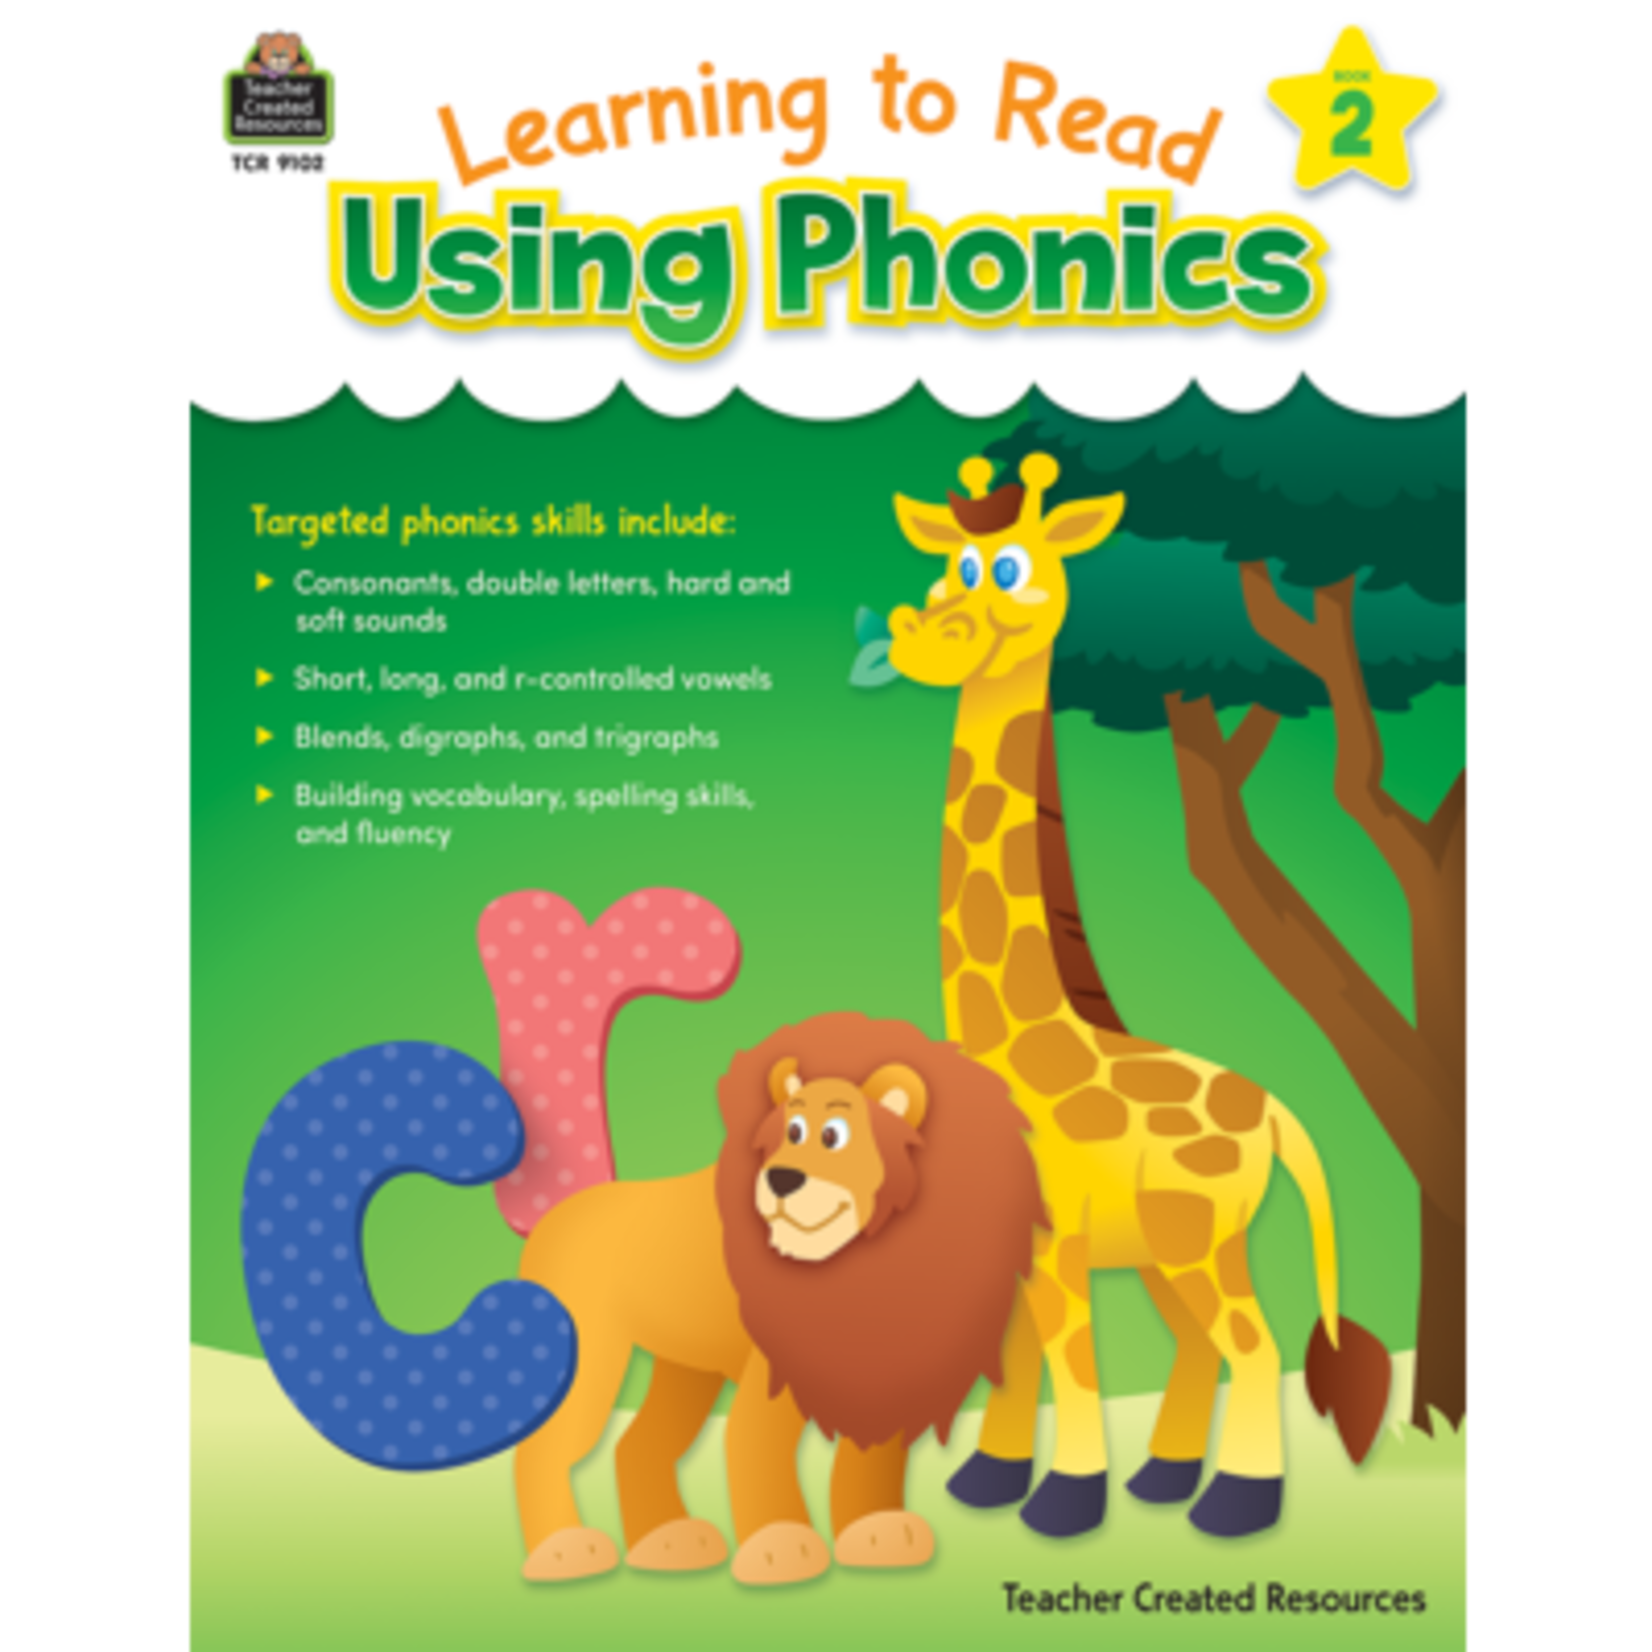 TEACHER CREATED RESOURCES Learning to Read Using Phonics (Book 2)